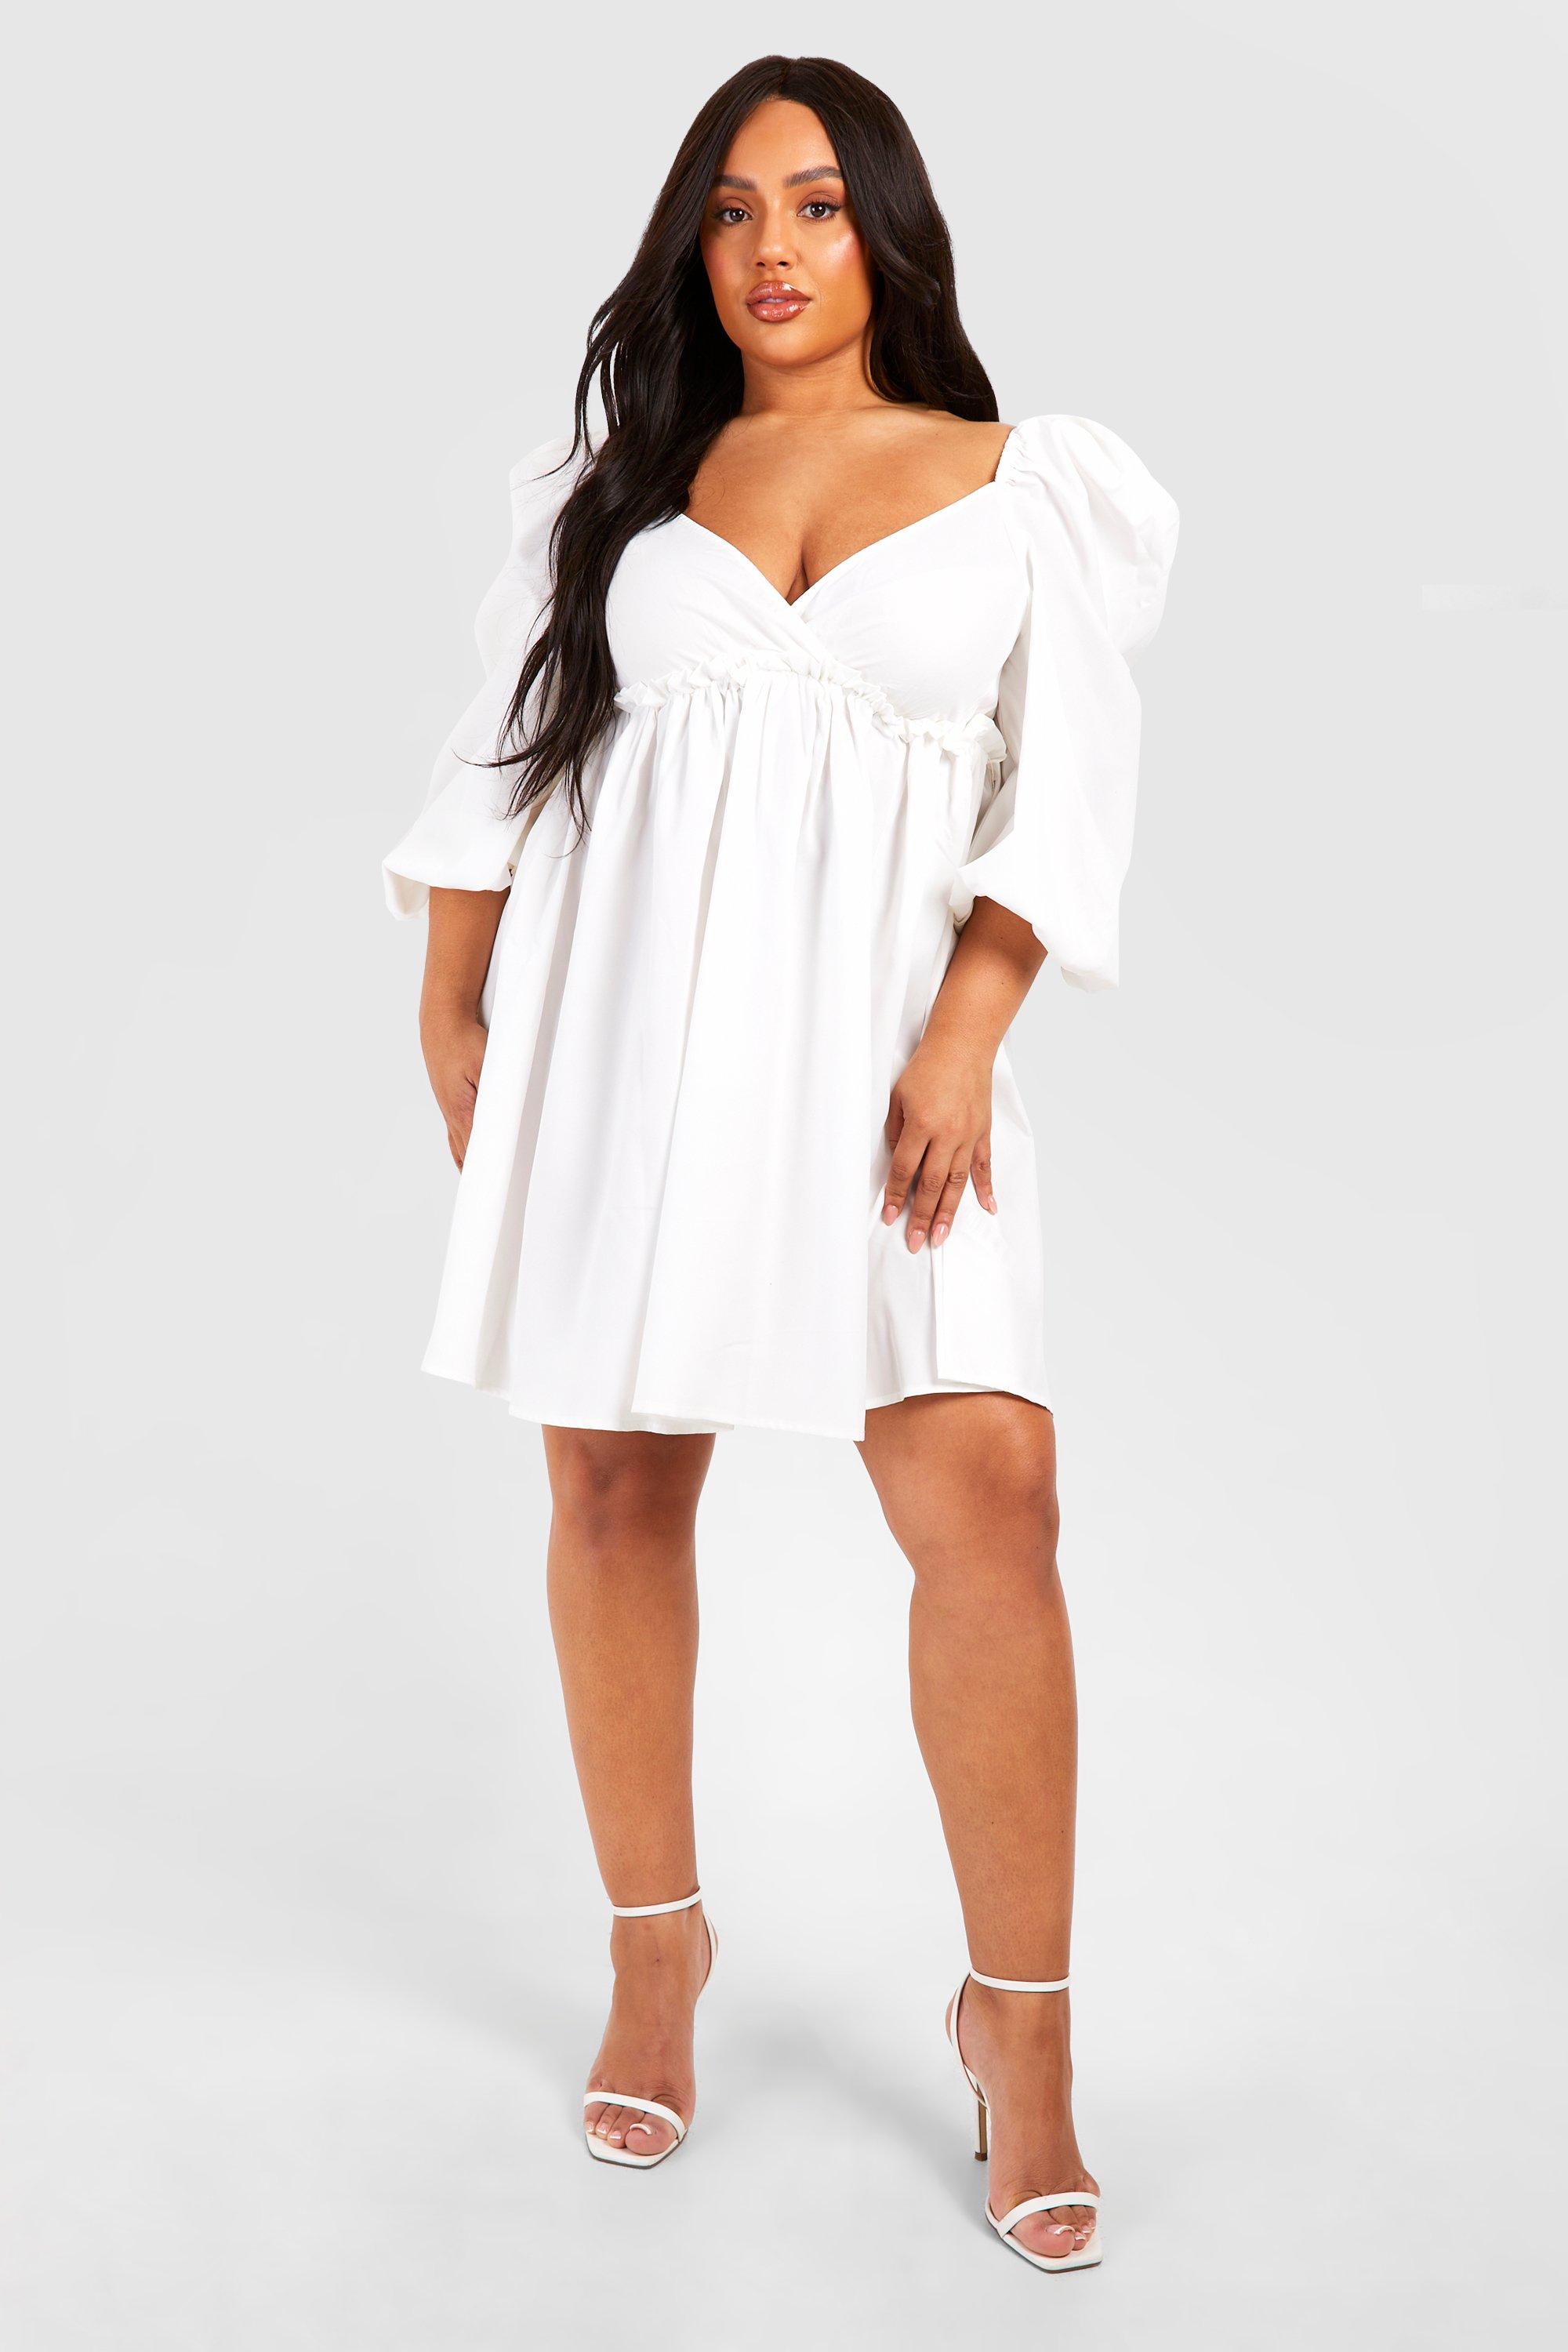 Plus Size | The White Dress by the Shore